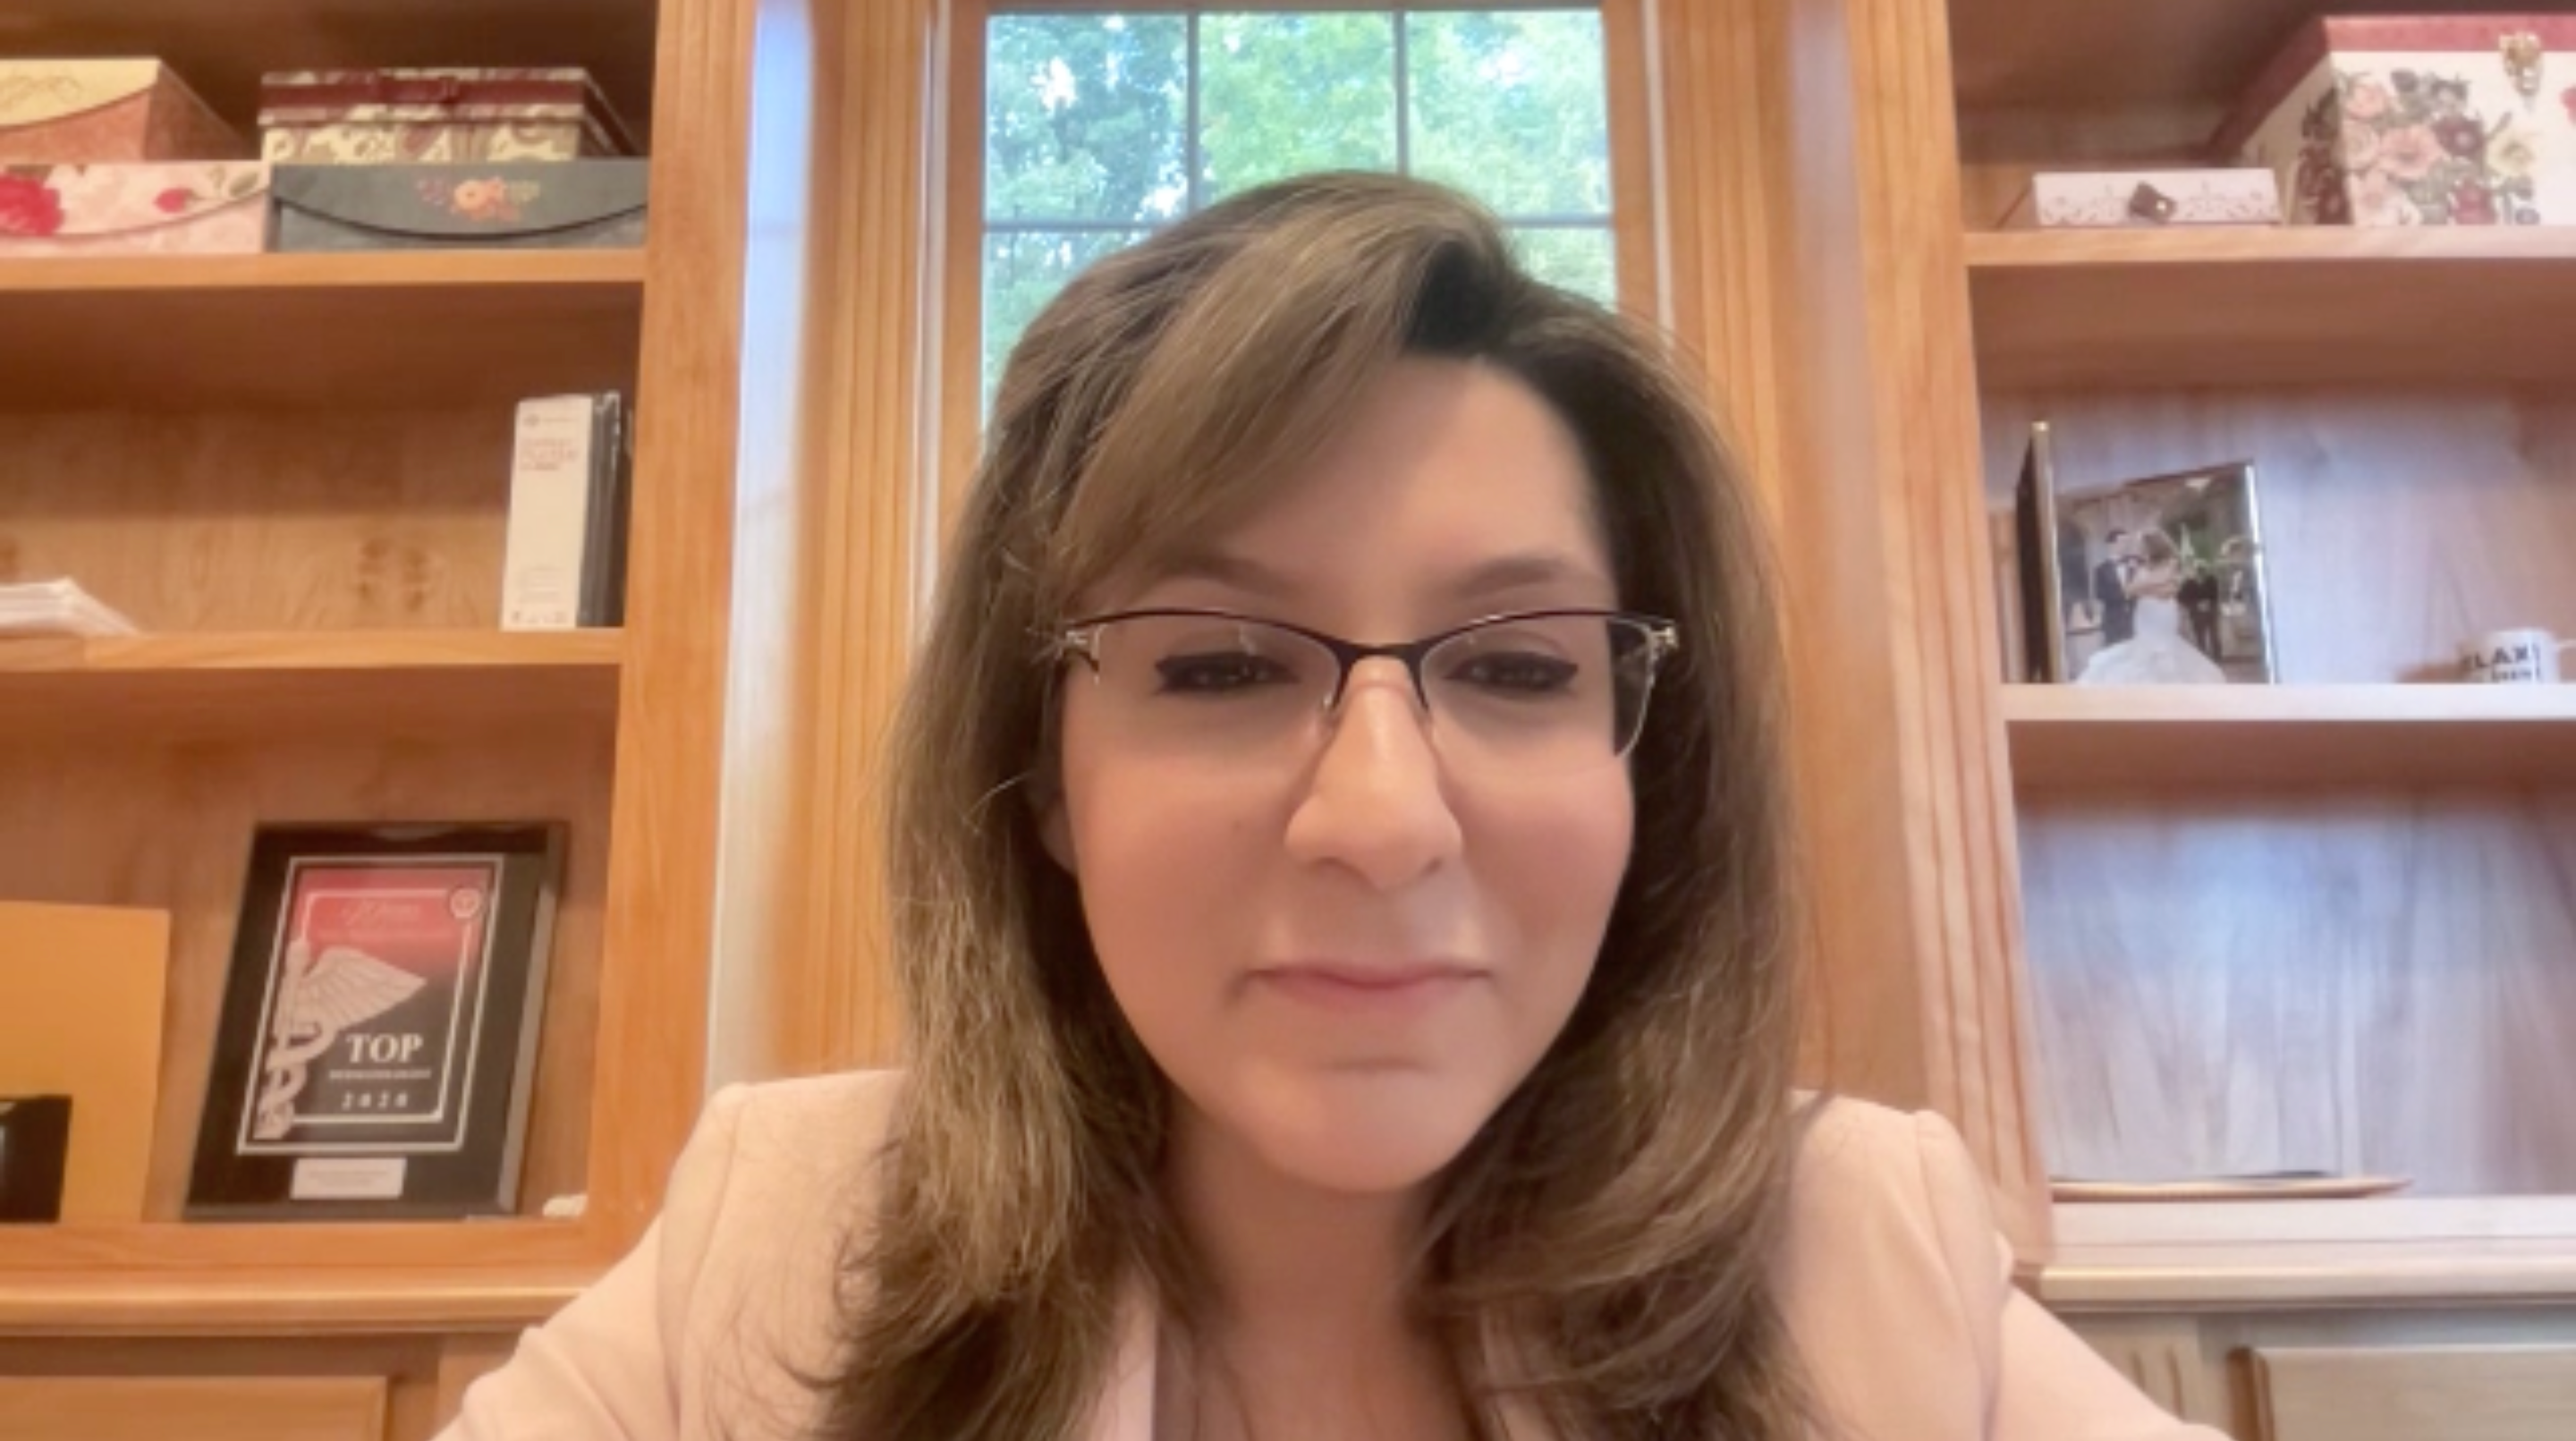 Mona Shahriari, MD, assistant clinical professor of dermatology at Yale University and associate director of clinical trials at Central Connecticut Dermatology